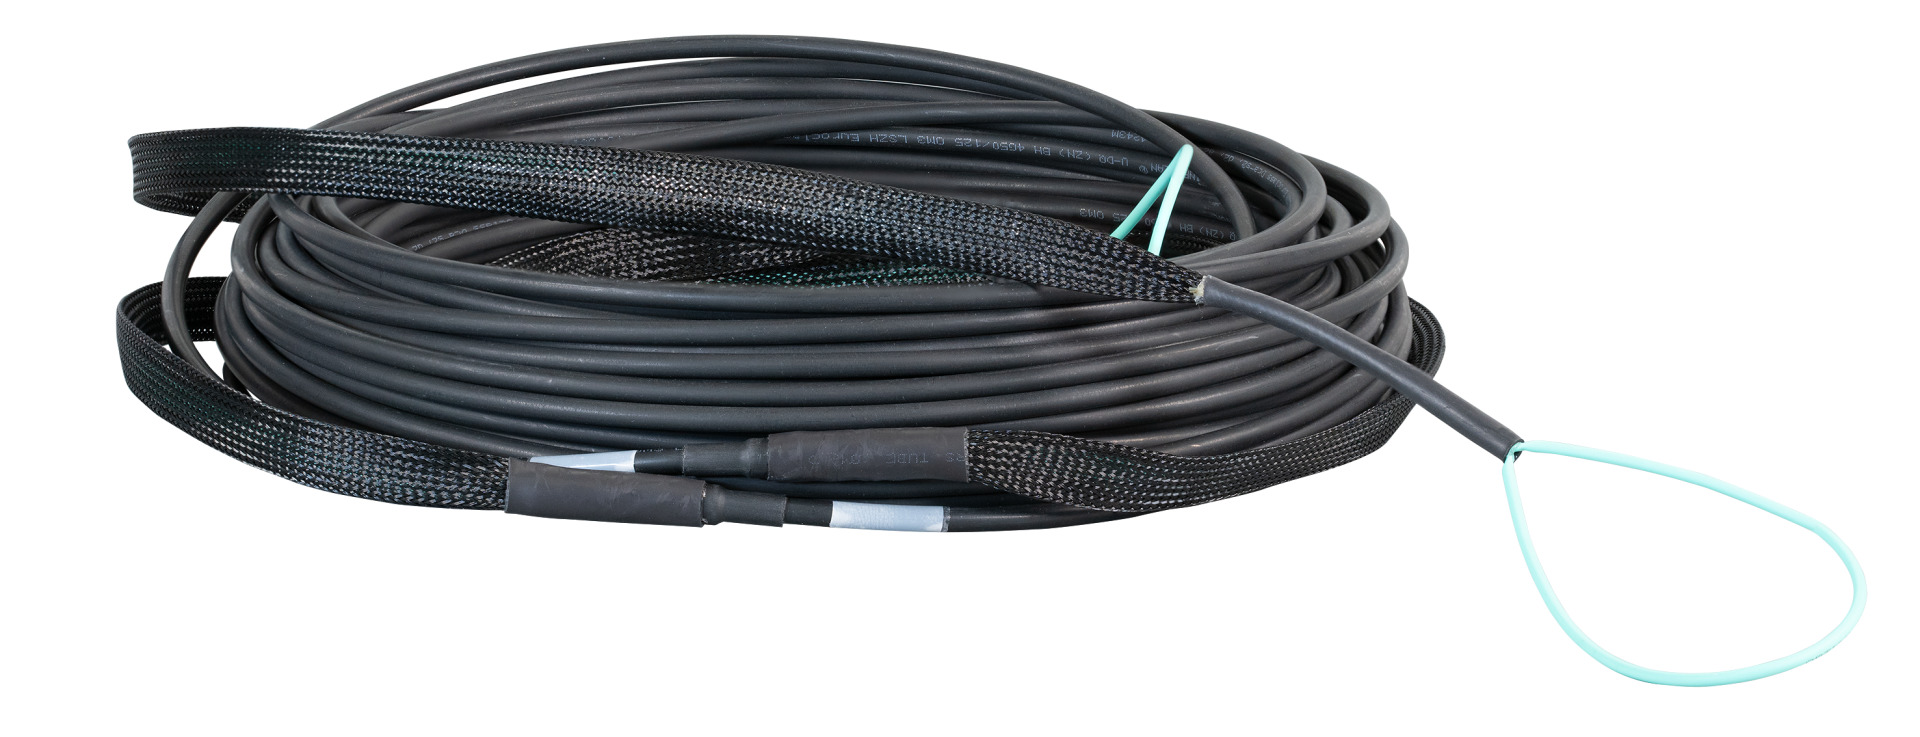 Trunk cable U-DQ(ZN)BH 8G 50/125, LC/LC OM3 120m